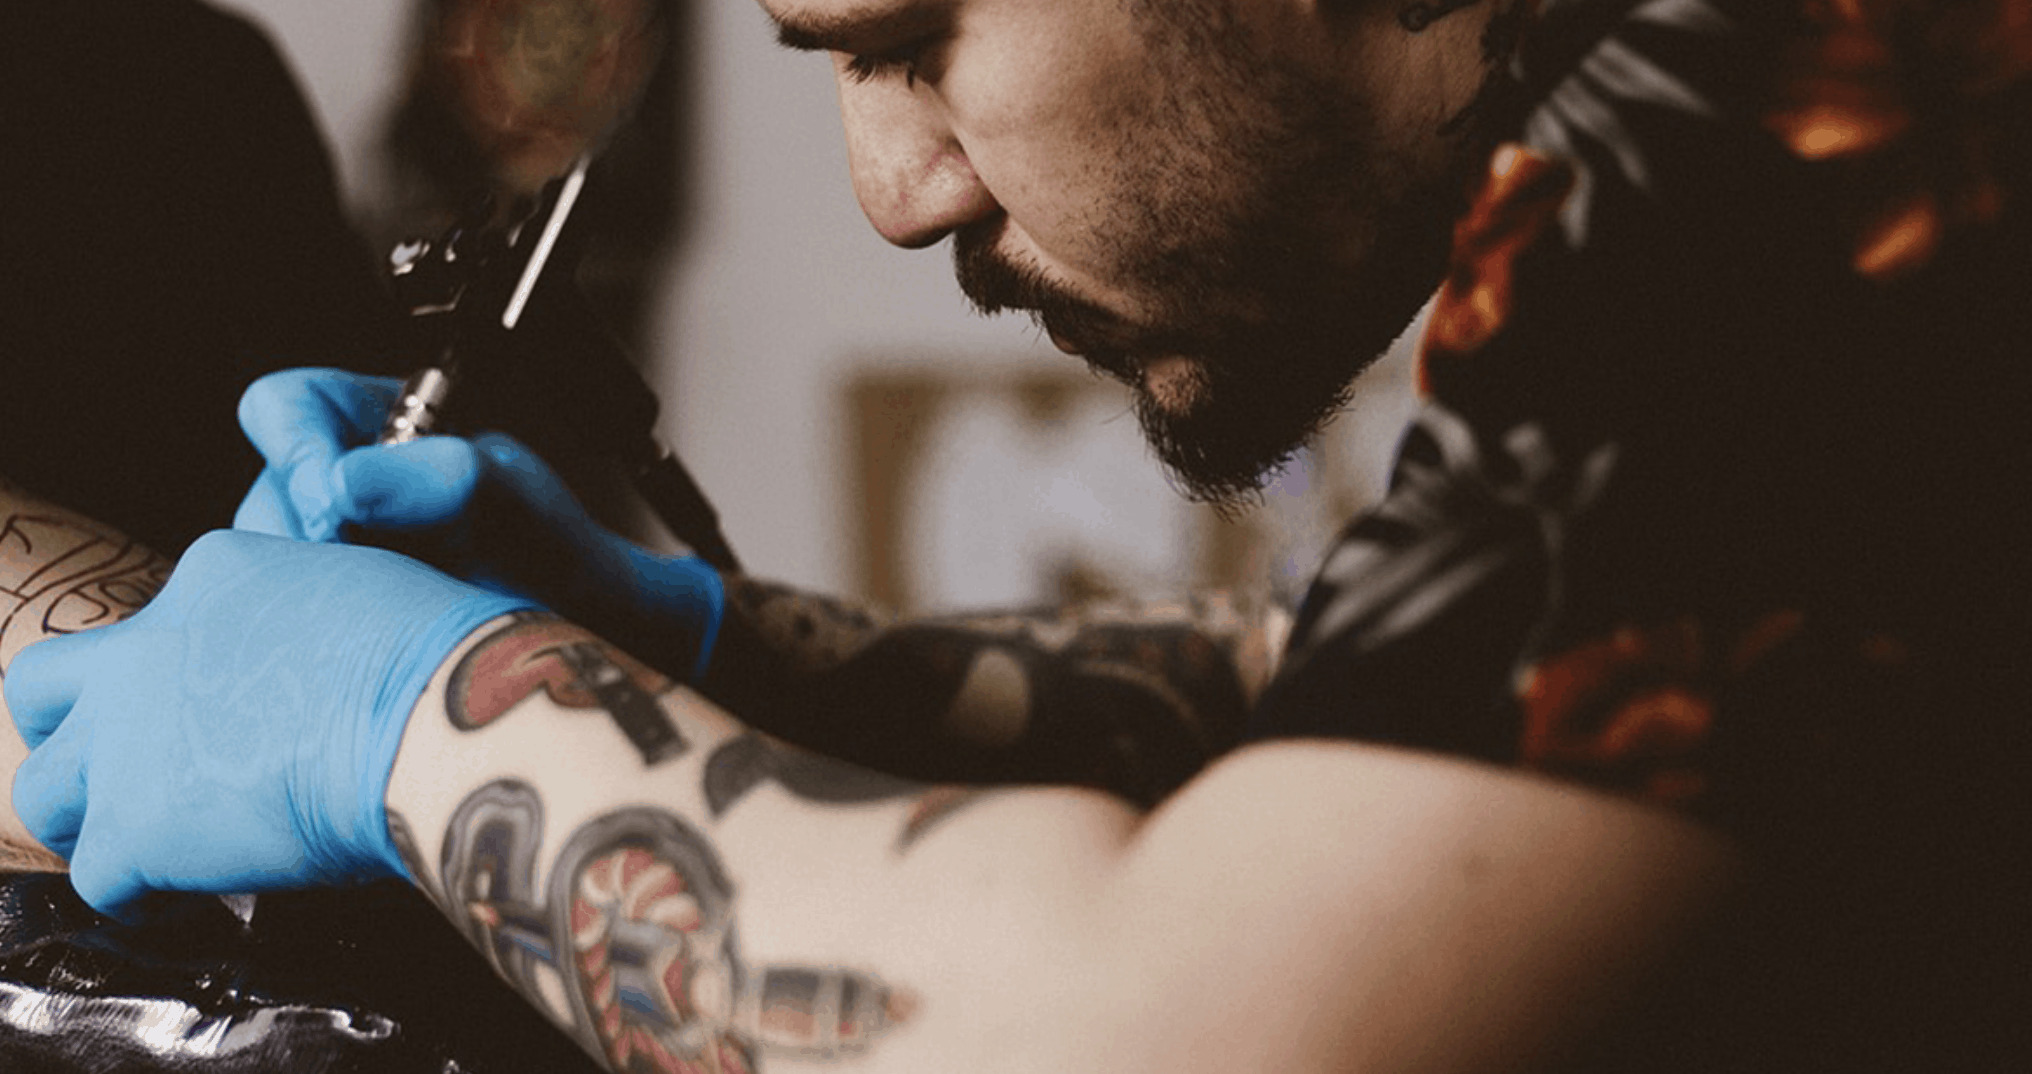 What to know about tattoos before doing them